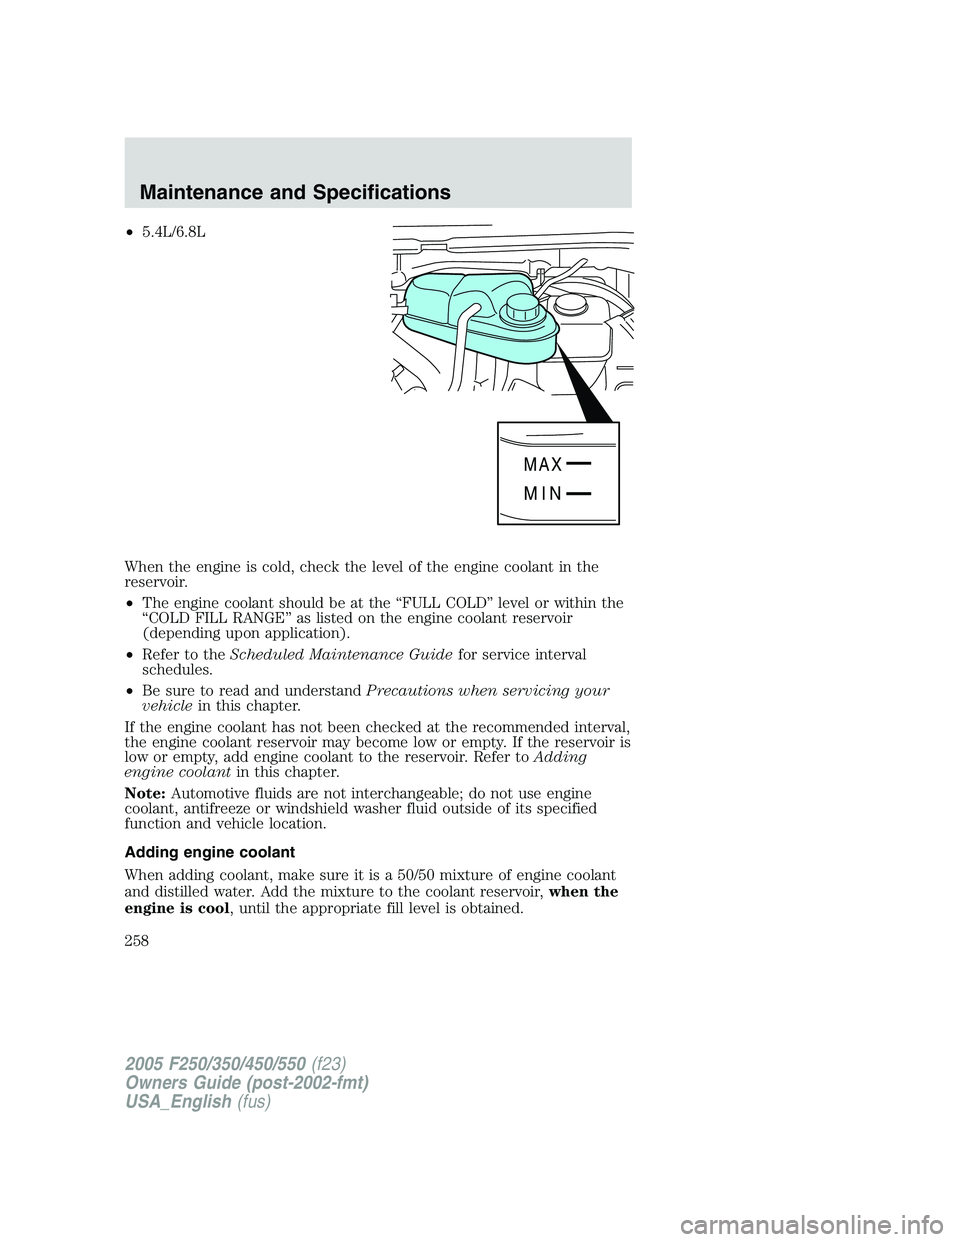 FORD F250 SUPER DUTY 2005  Owners Manual • 5.4L/6.8L
When the engine is cold, check the level of the engine coolant in the
reservoir.
• The engine coolant should be at the “FULL COLD” level or within the
“COLD FILL RANGE” as list